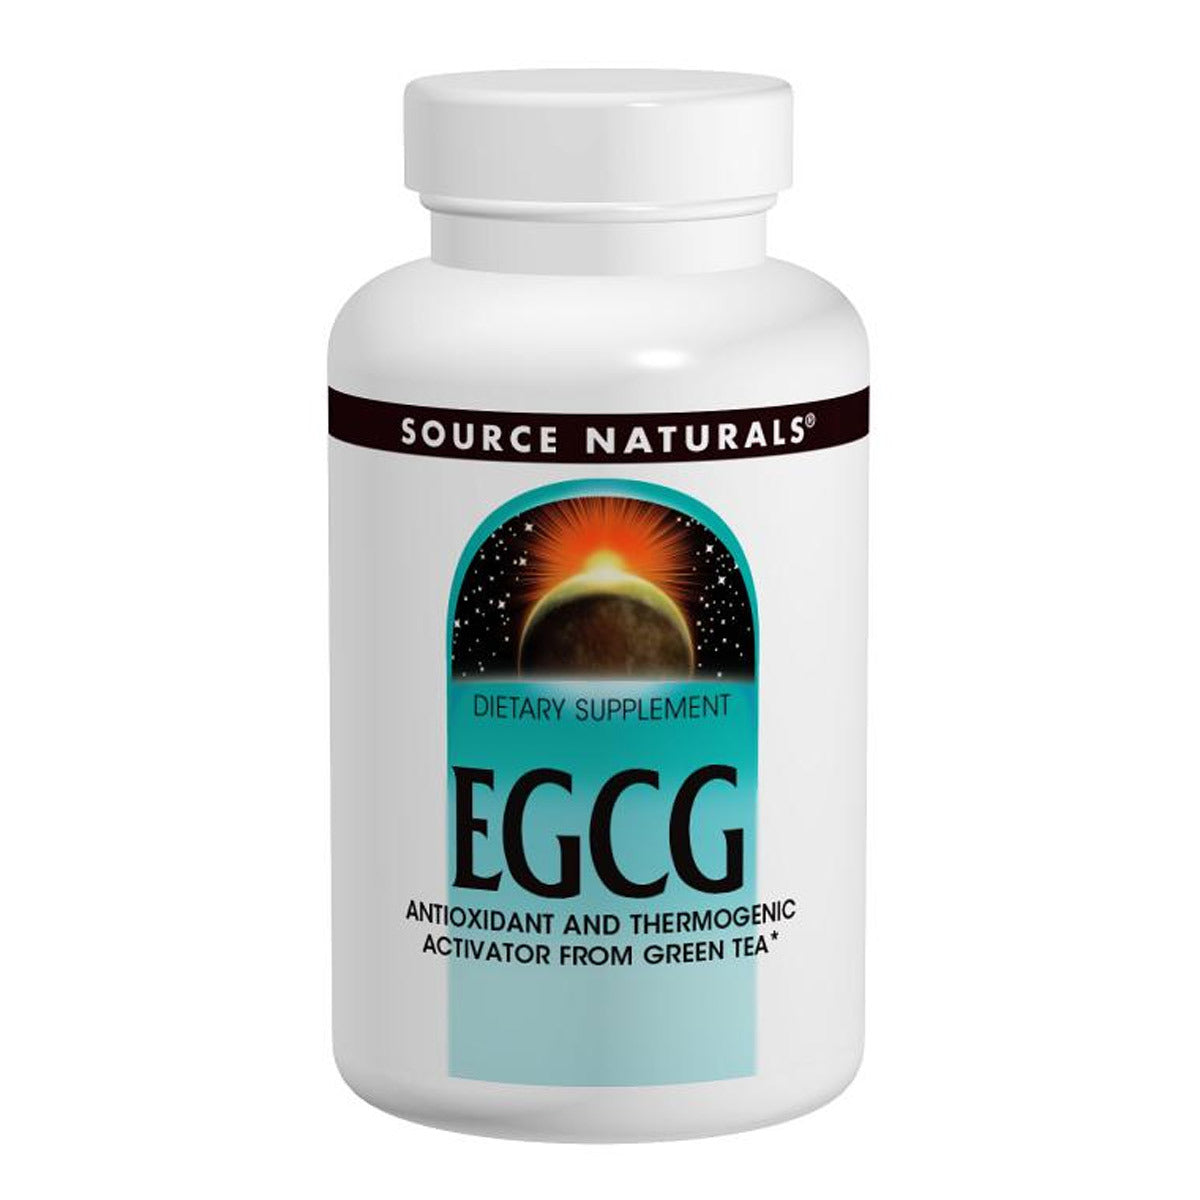 Primary image of EGCG 350mg